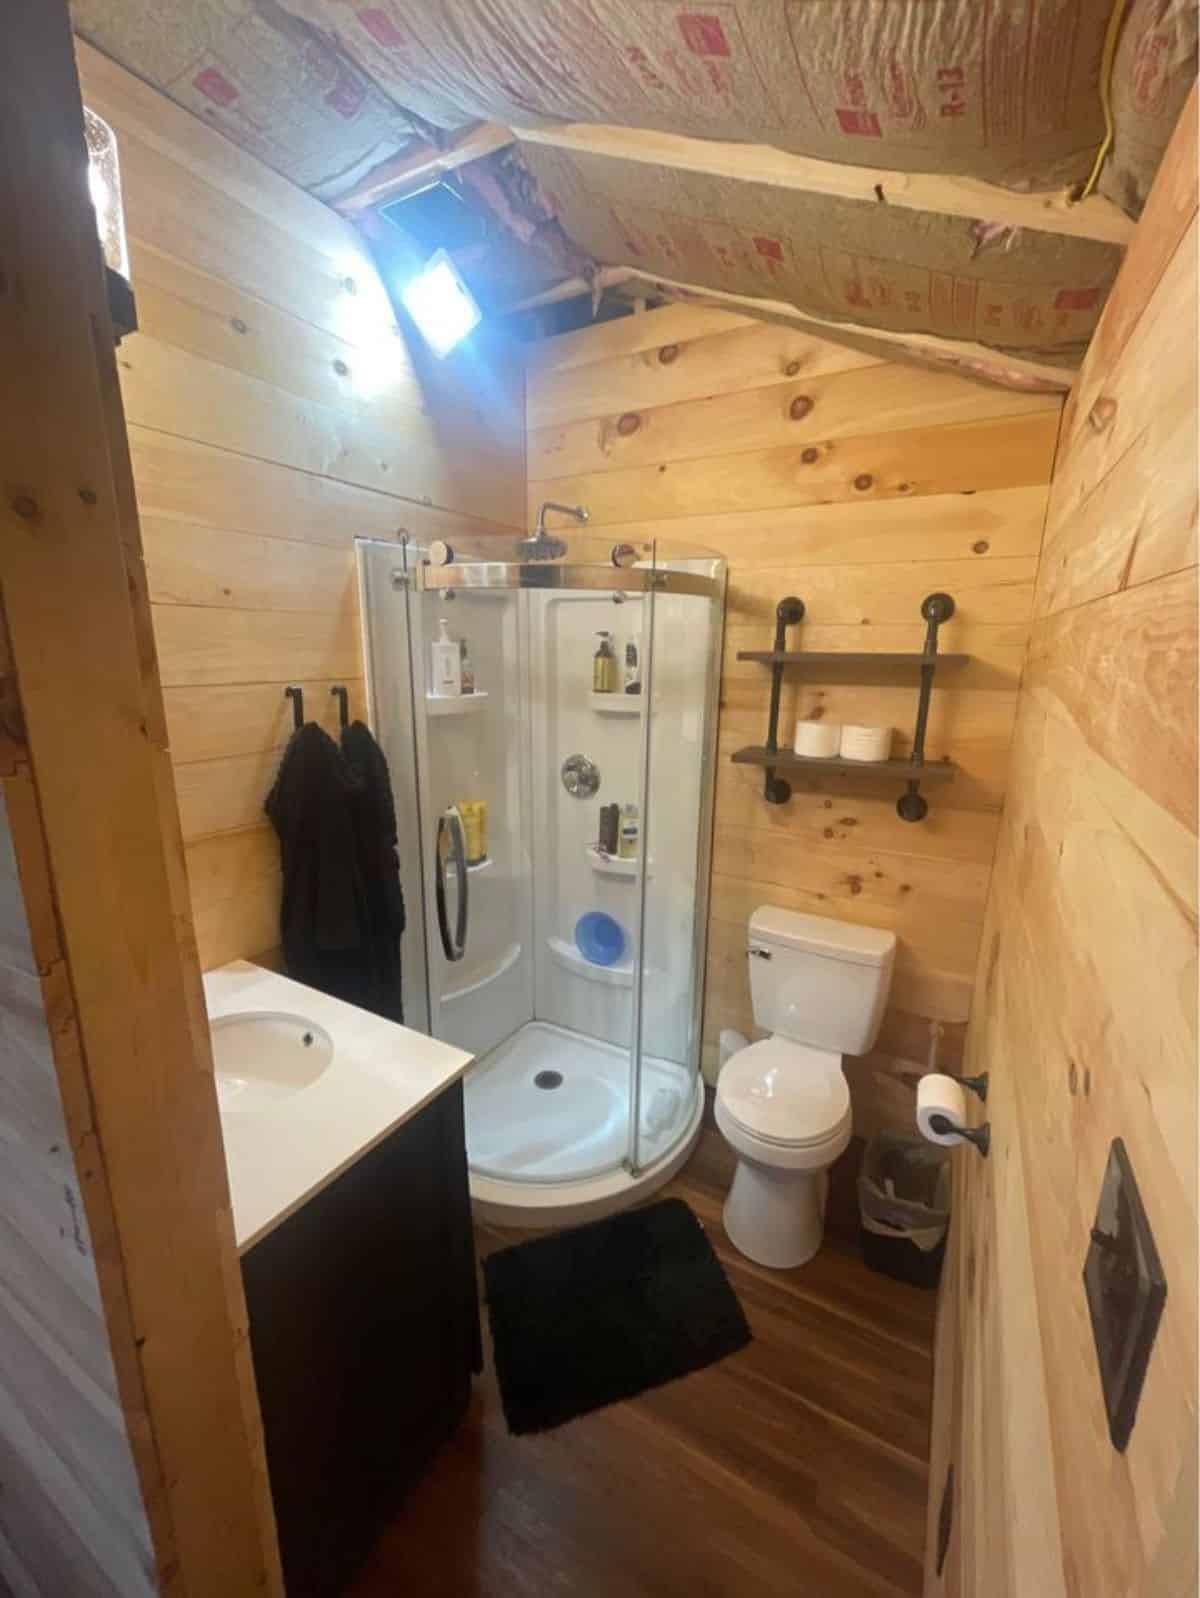 Standard toilet & separate shower area in bathroom of Idyllic Tiny House